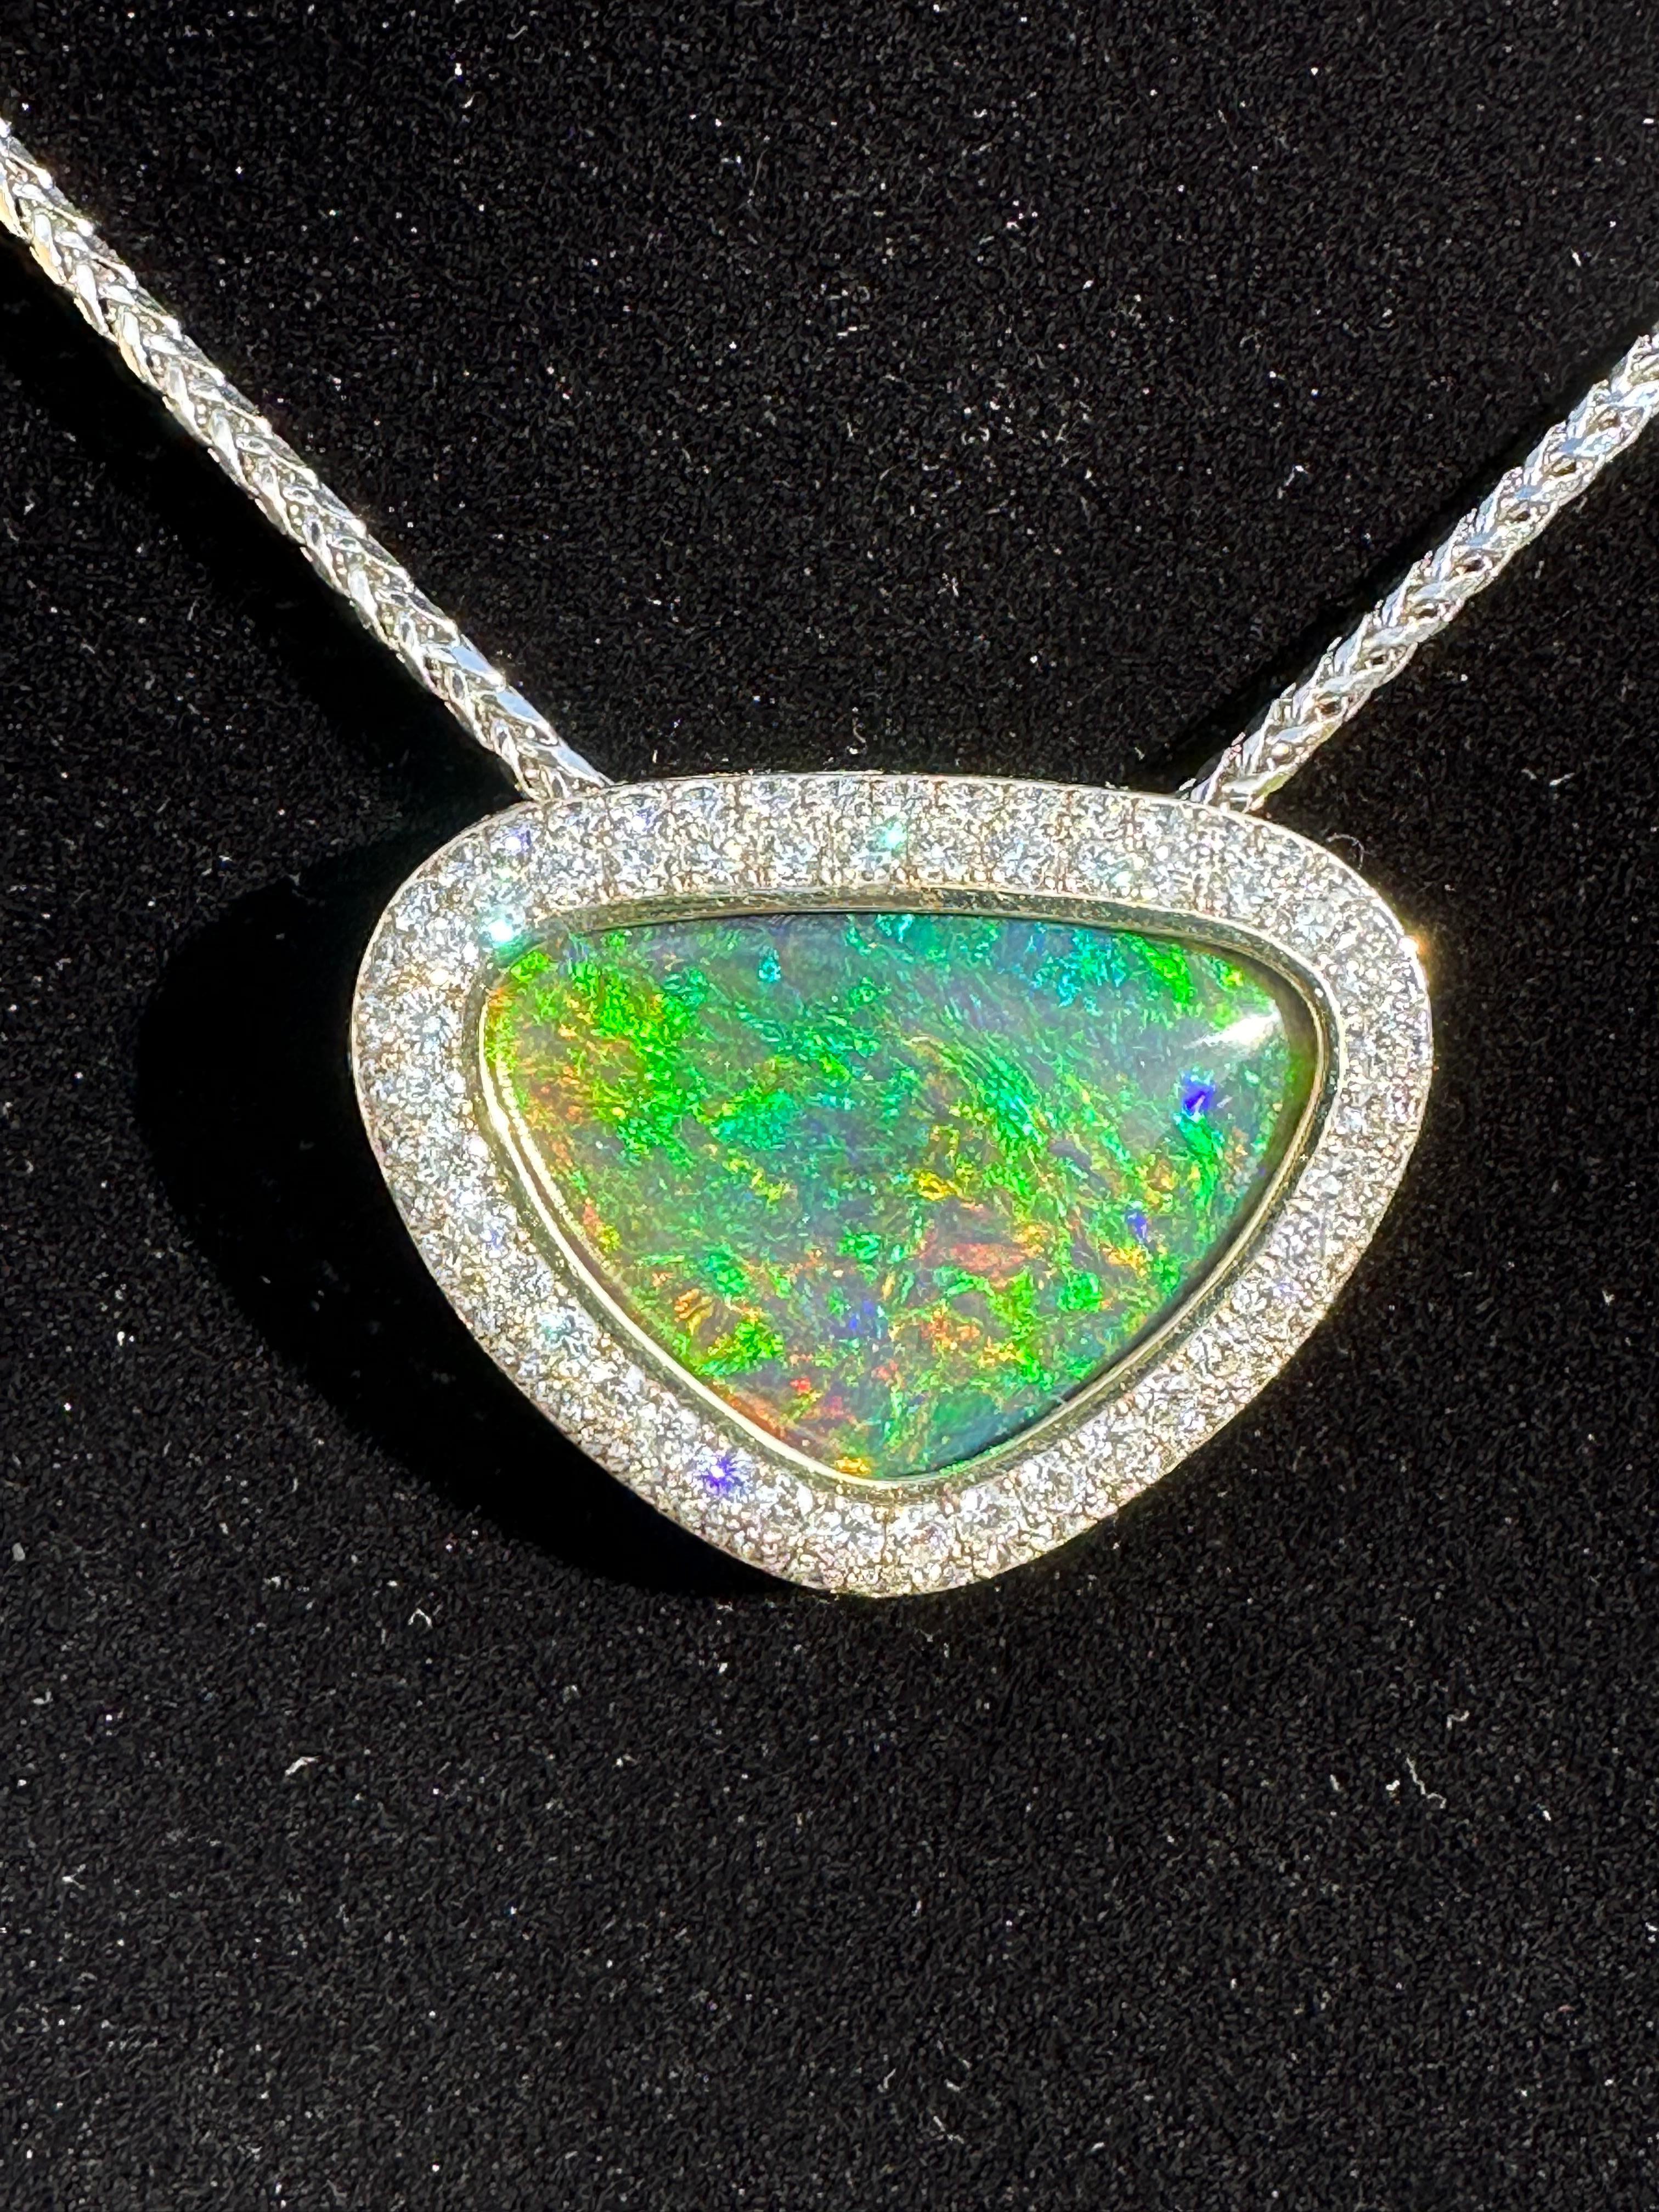 Very showy, finest rare gem quality, 18 karat white and yellow gold huge natural Australian black opal and diamond estate pendant necklace features a 37.76 carat fiery some what triangular shaped natural opal in the center, surrounded by a double